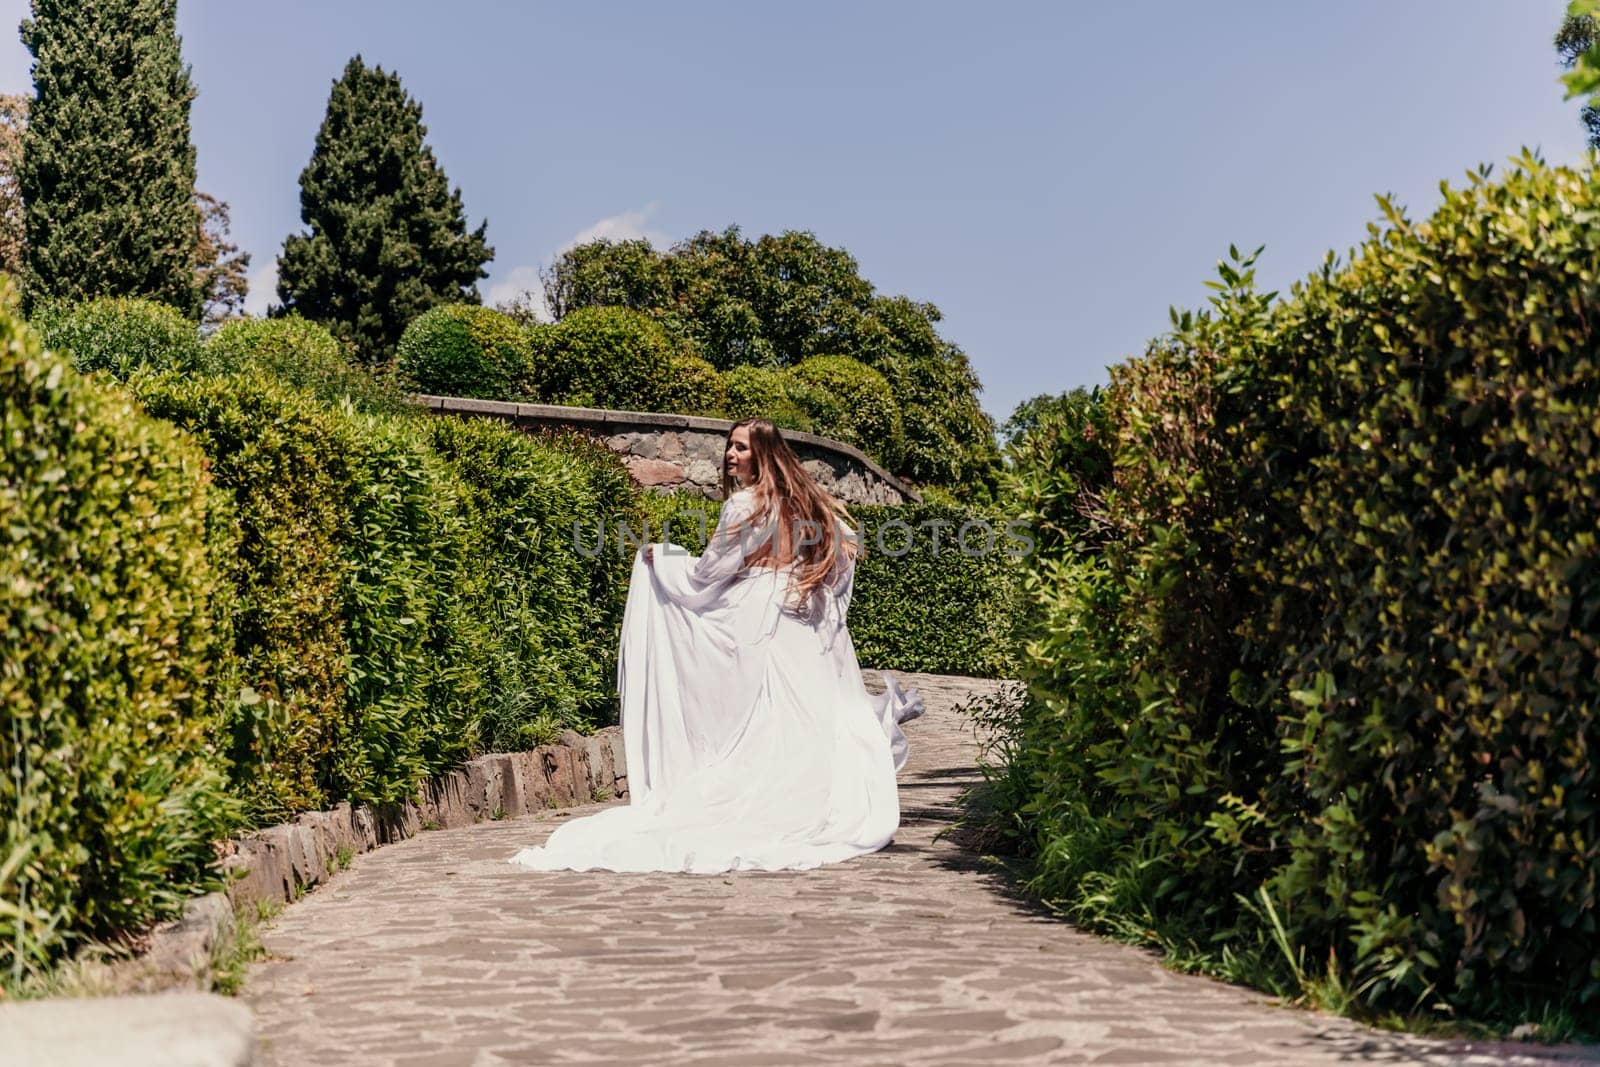 Brunette runs white dress park. A beautiful woman with long brown hair and a long white dress runs along the path along the beautiful bushes in the park, rear view.